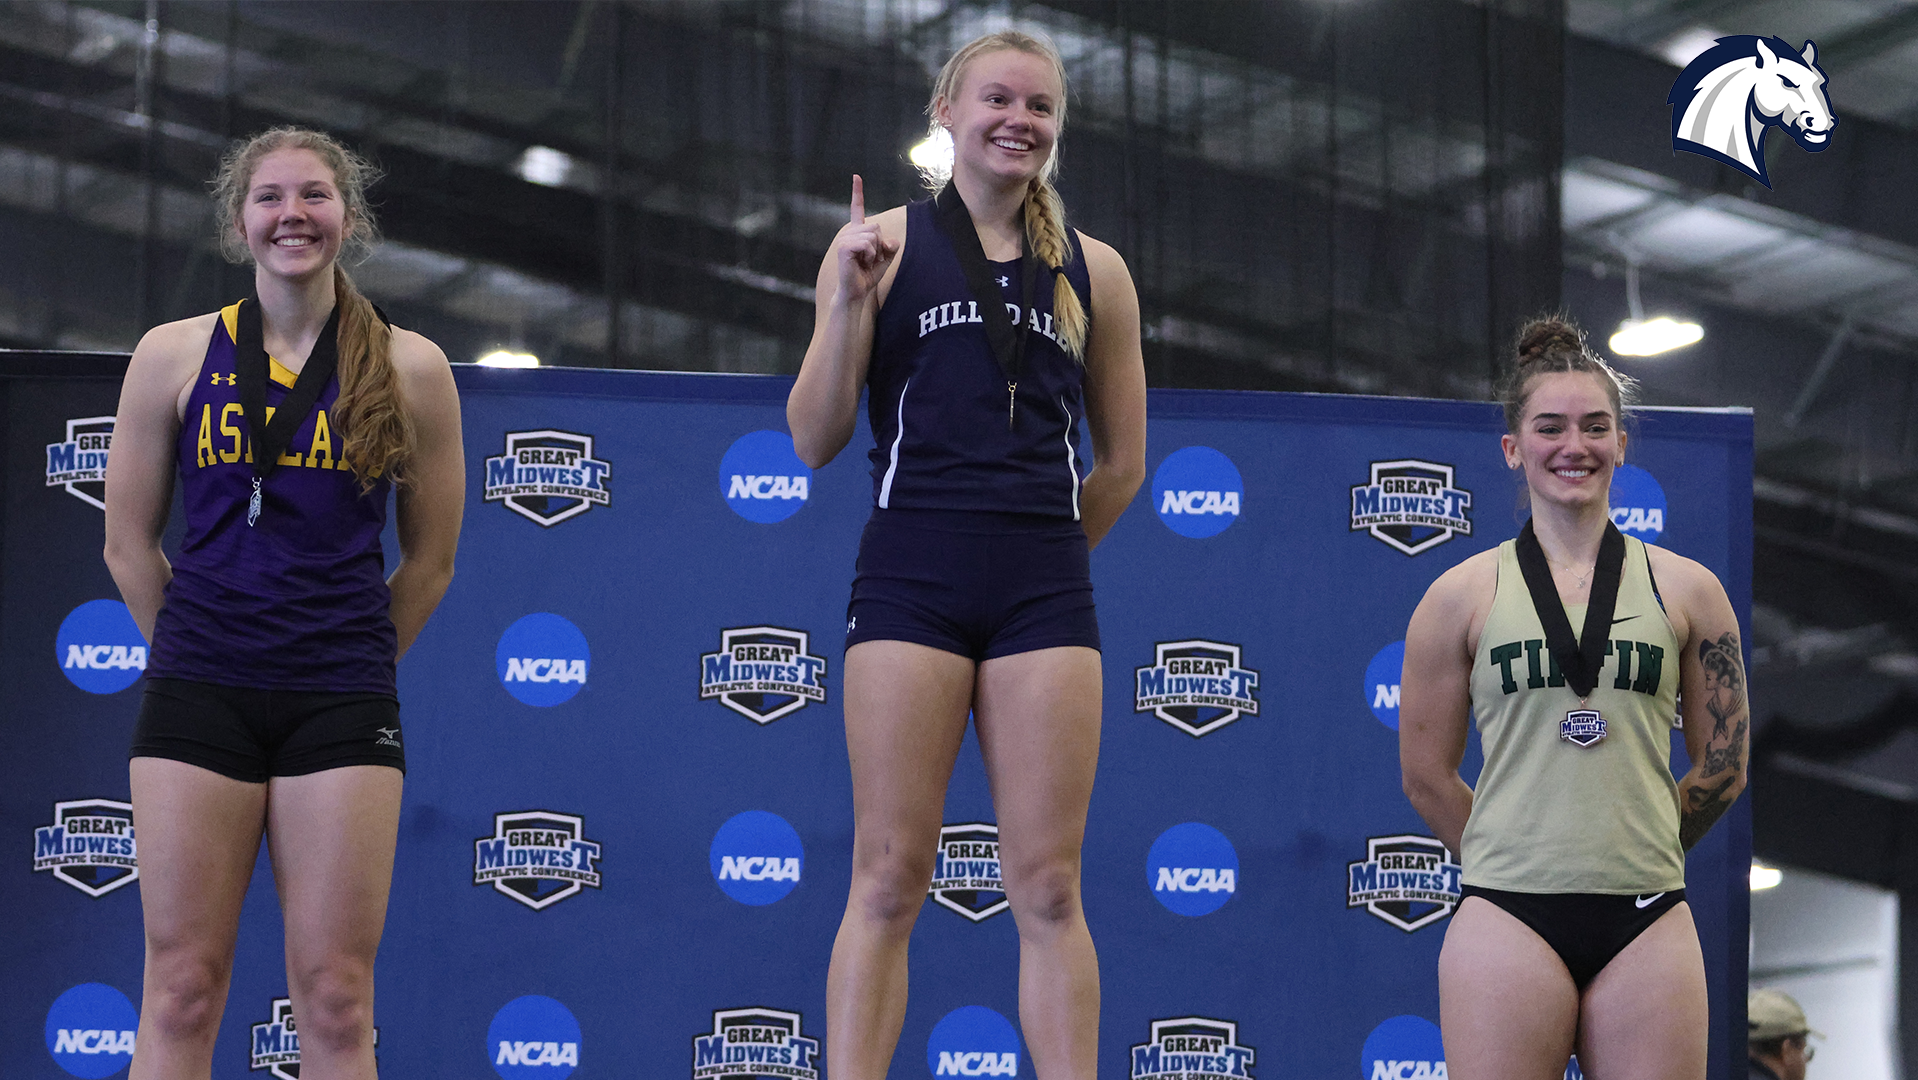 School records, titles highlight strong first day of G-MAC Indoor Championships for Charger women